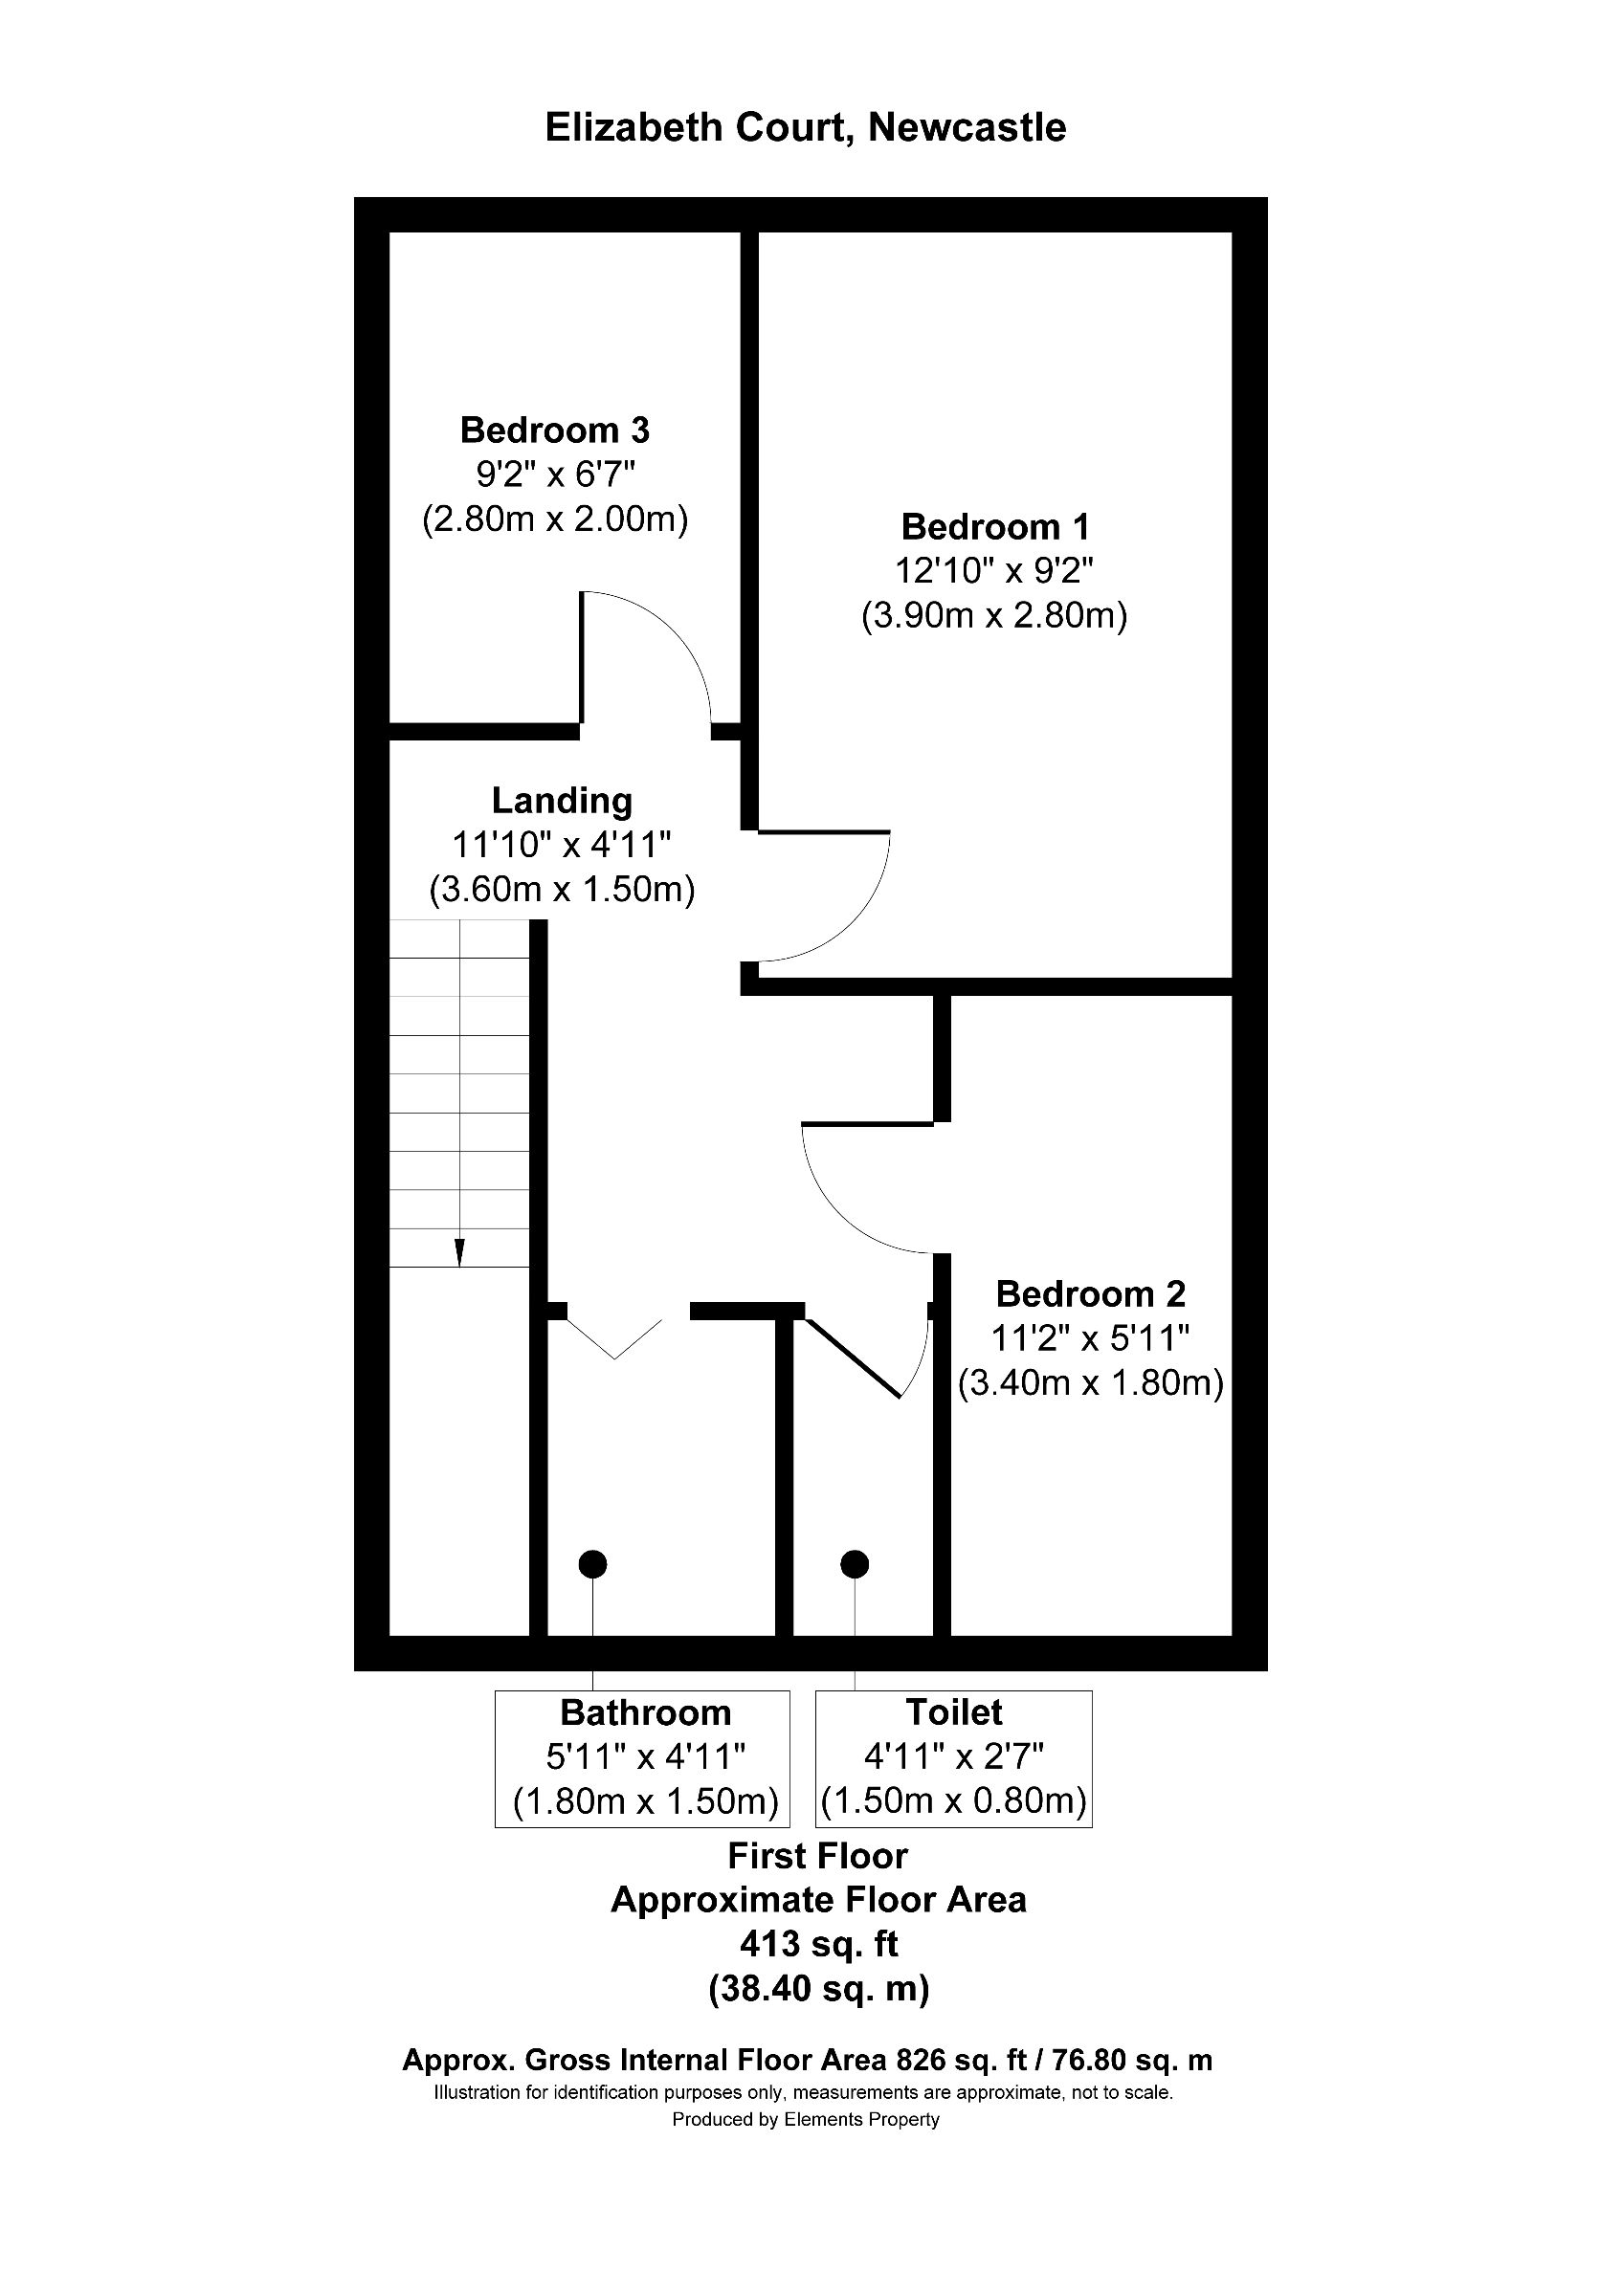 3 bed end of terrace house for sale in Elizabeth Court, Newcastle upon Tyne - Property floorplan